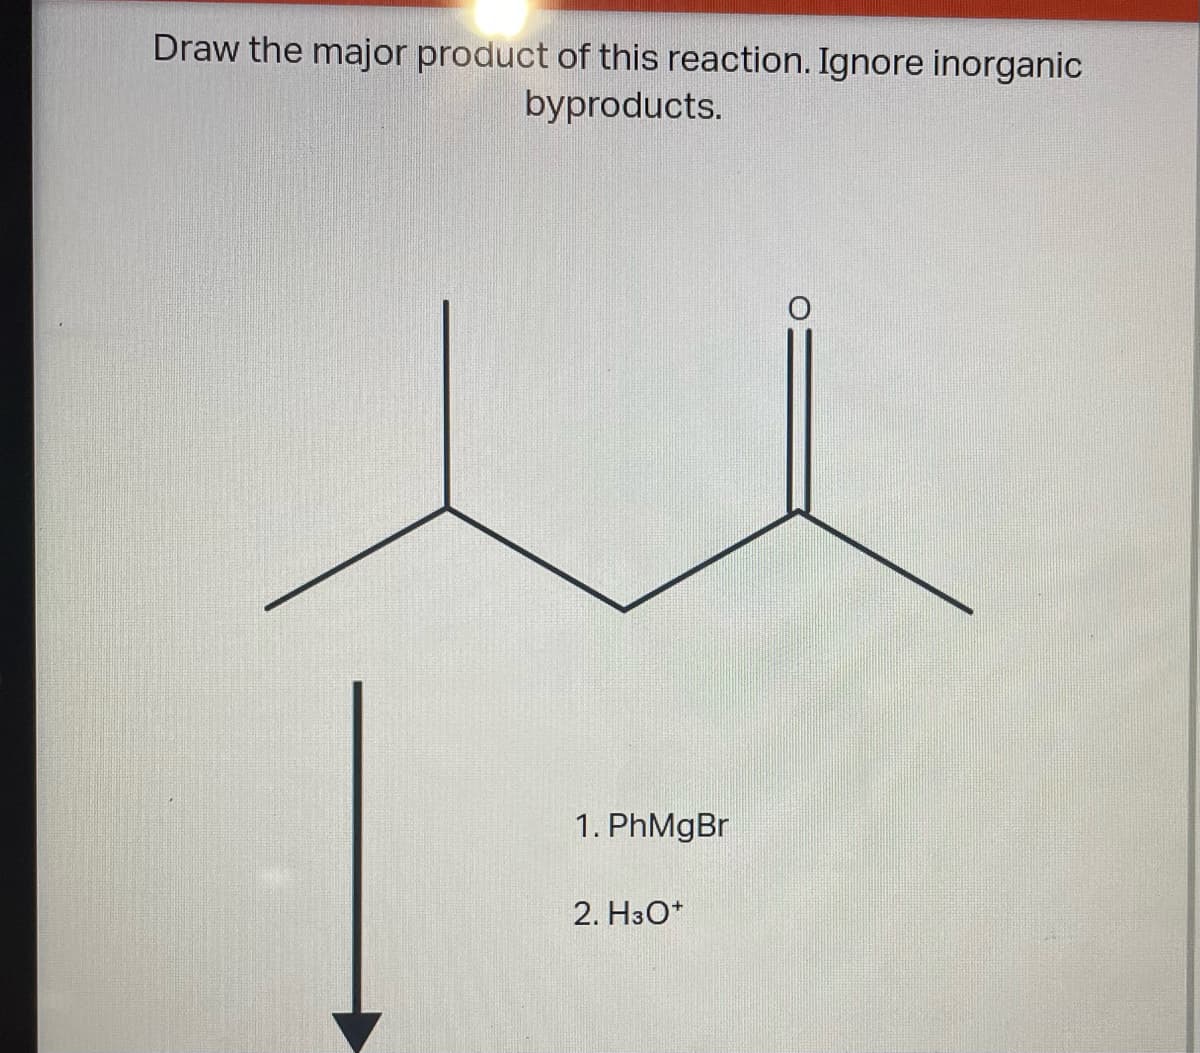 Draw the major product of this reaction. Ignore inorganic
byproducts.
1. PhMgBr
2. H3O+